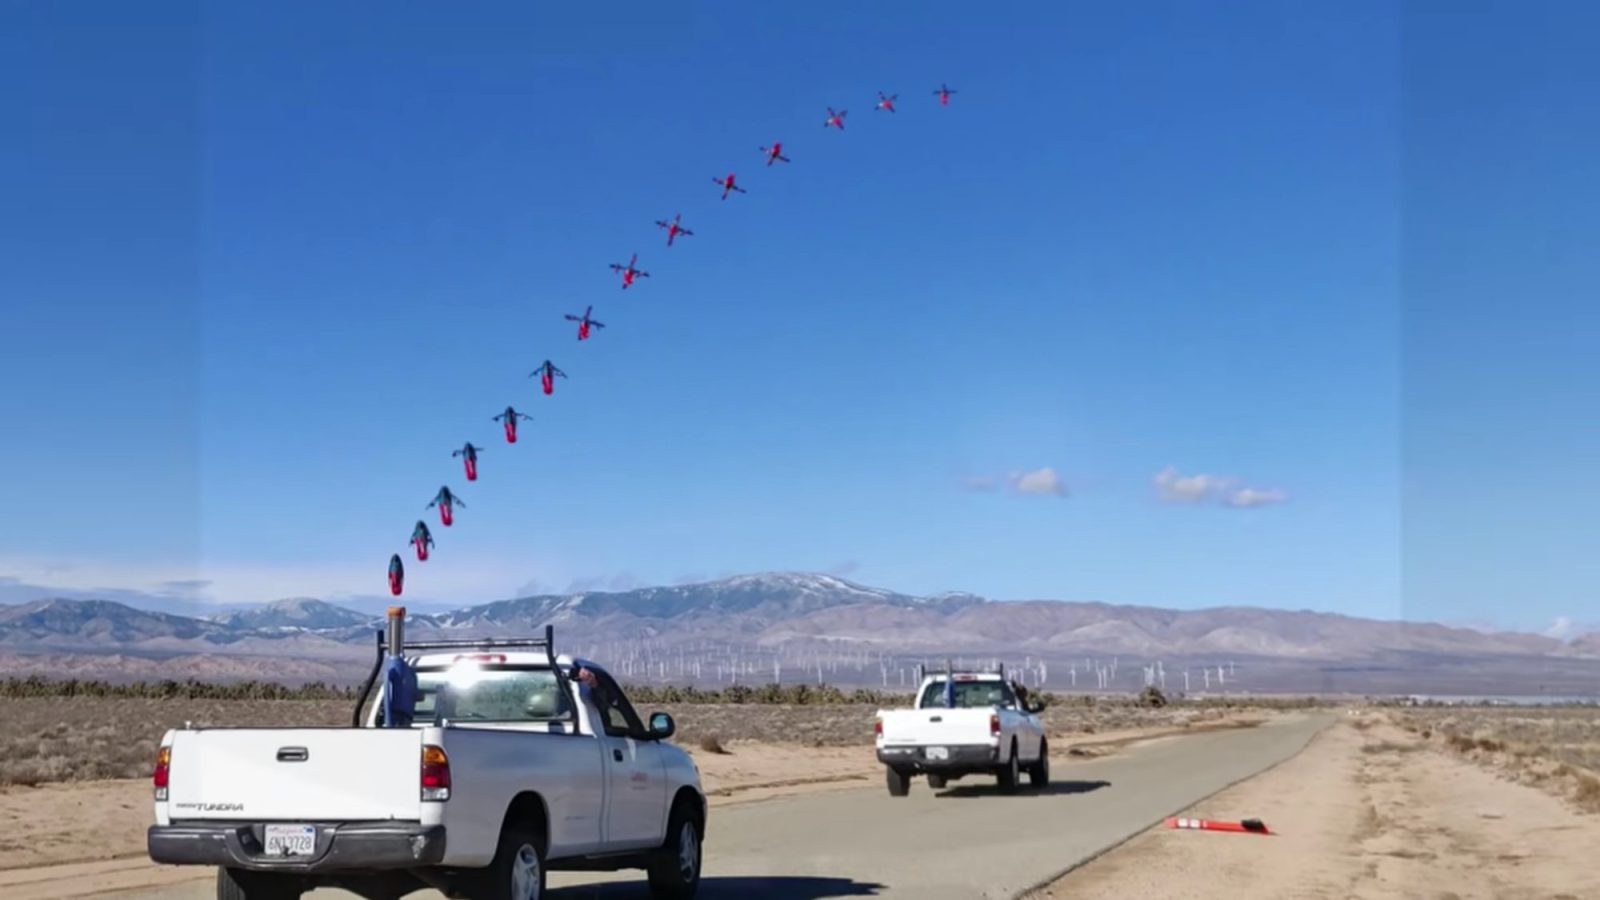 SQUID drone is launched by a cannon from a moving truck